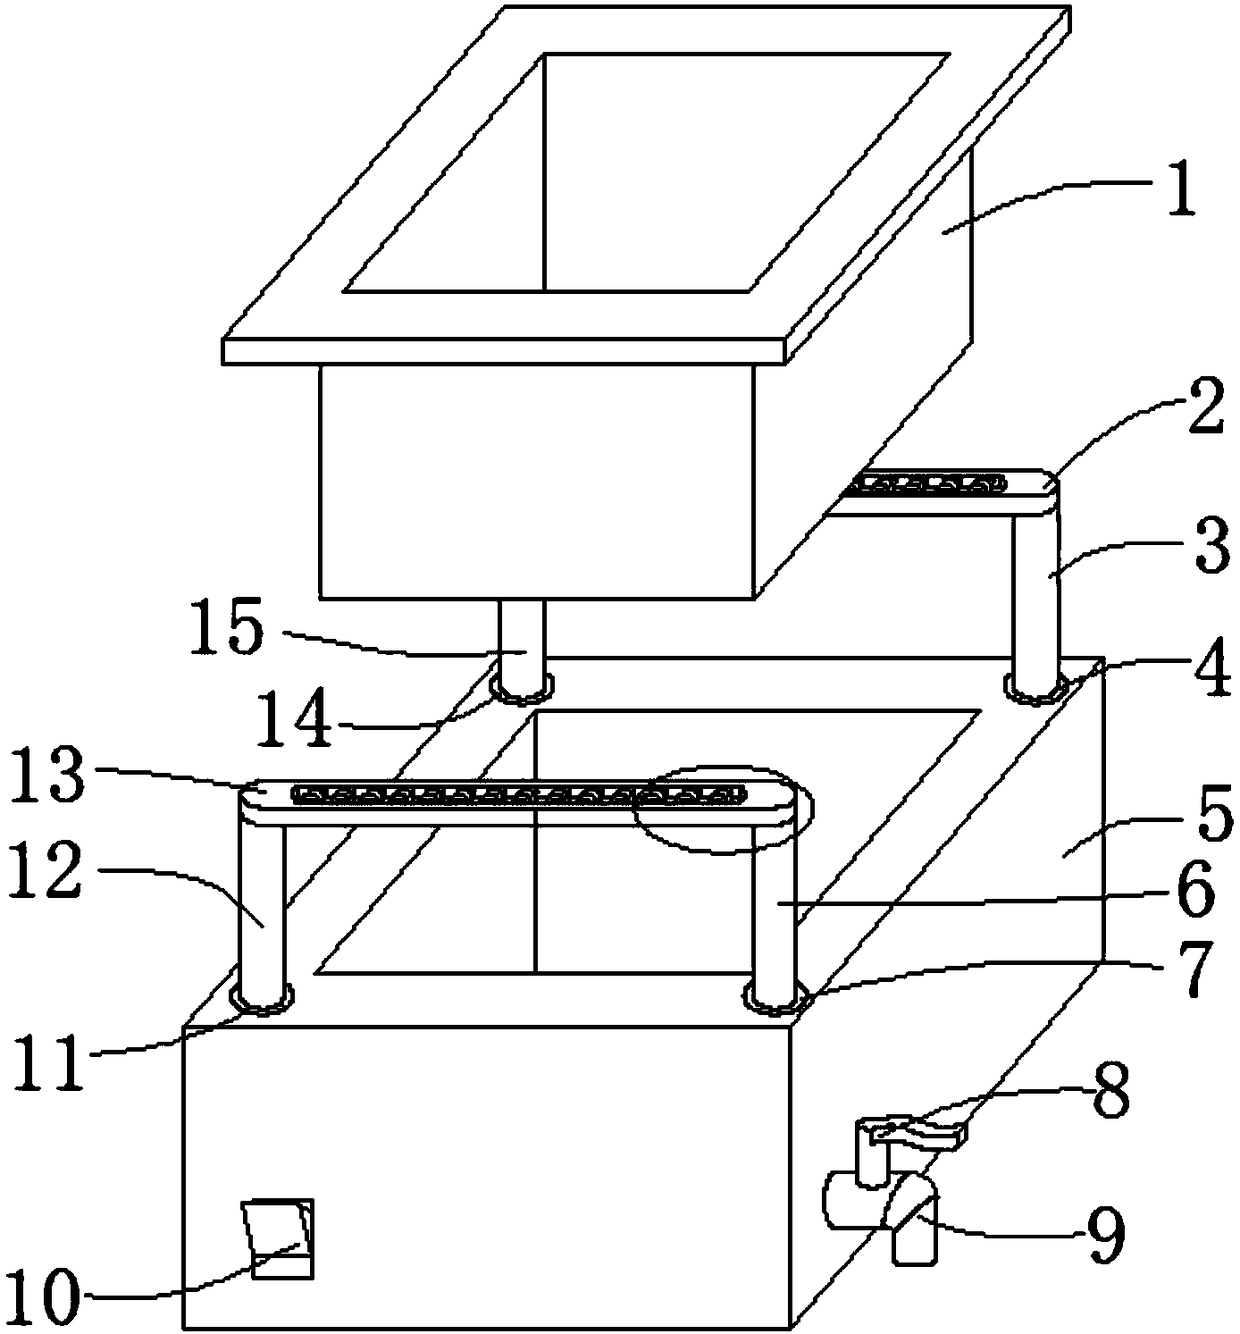 A bleaching device for paper product processing